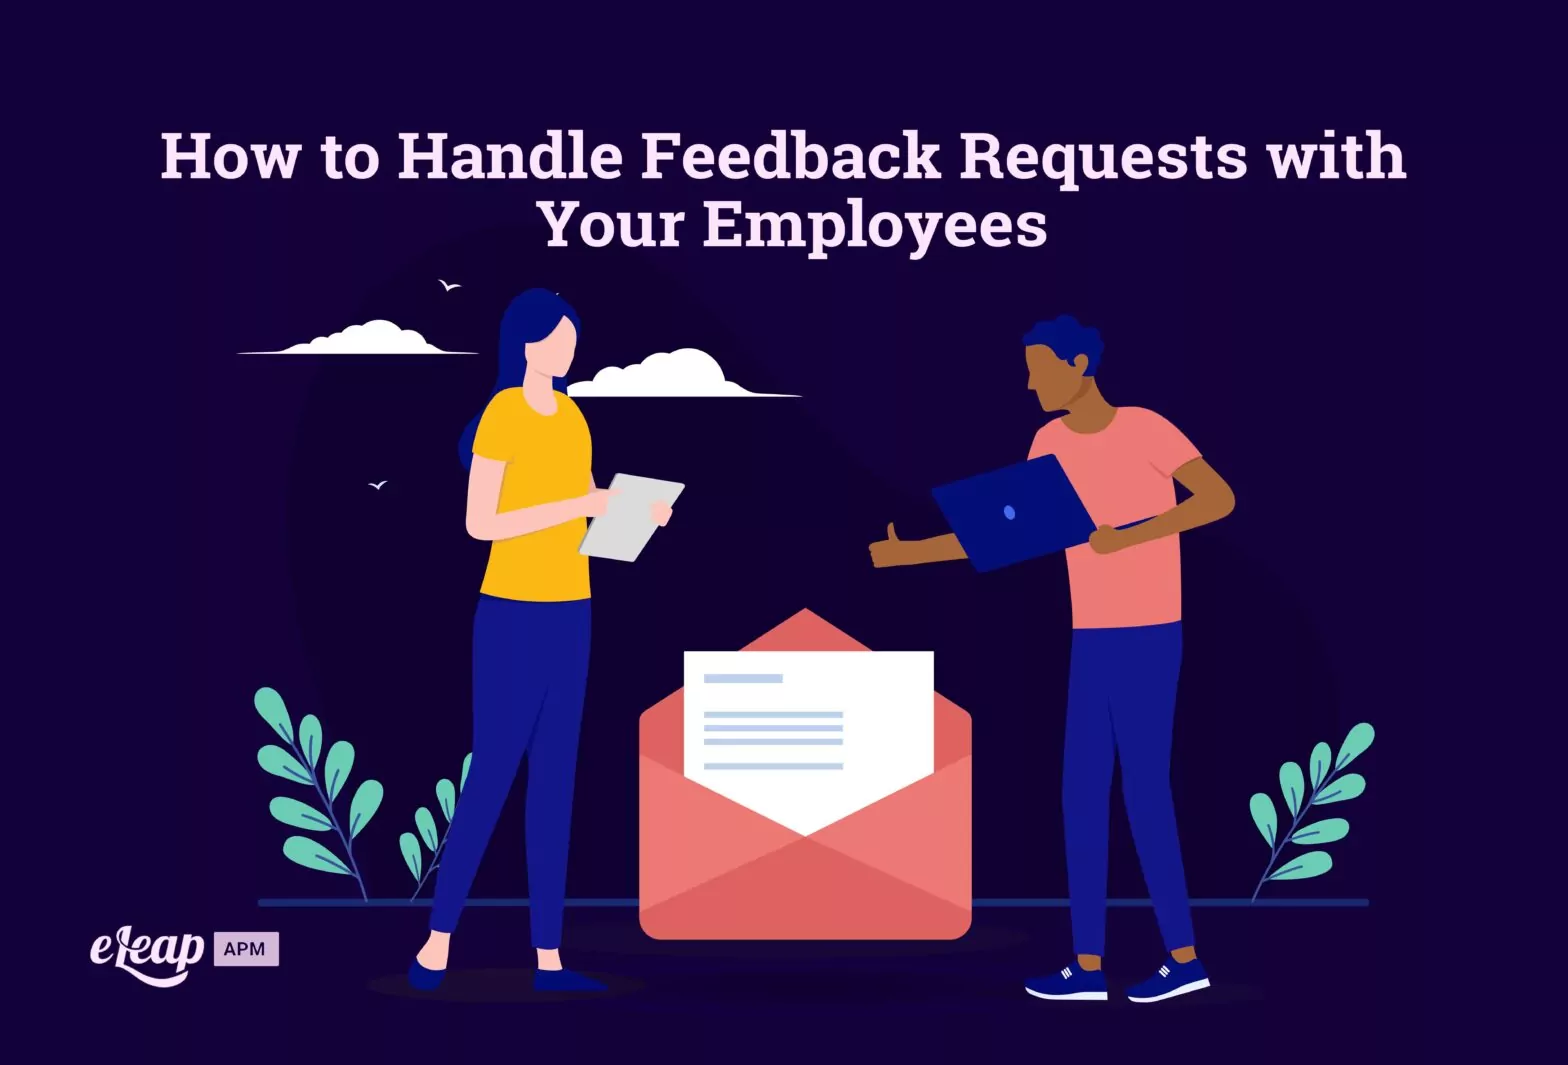 How to Handle Feedback Requests with Your Employees